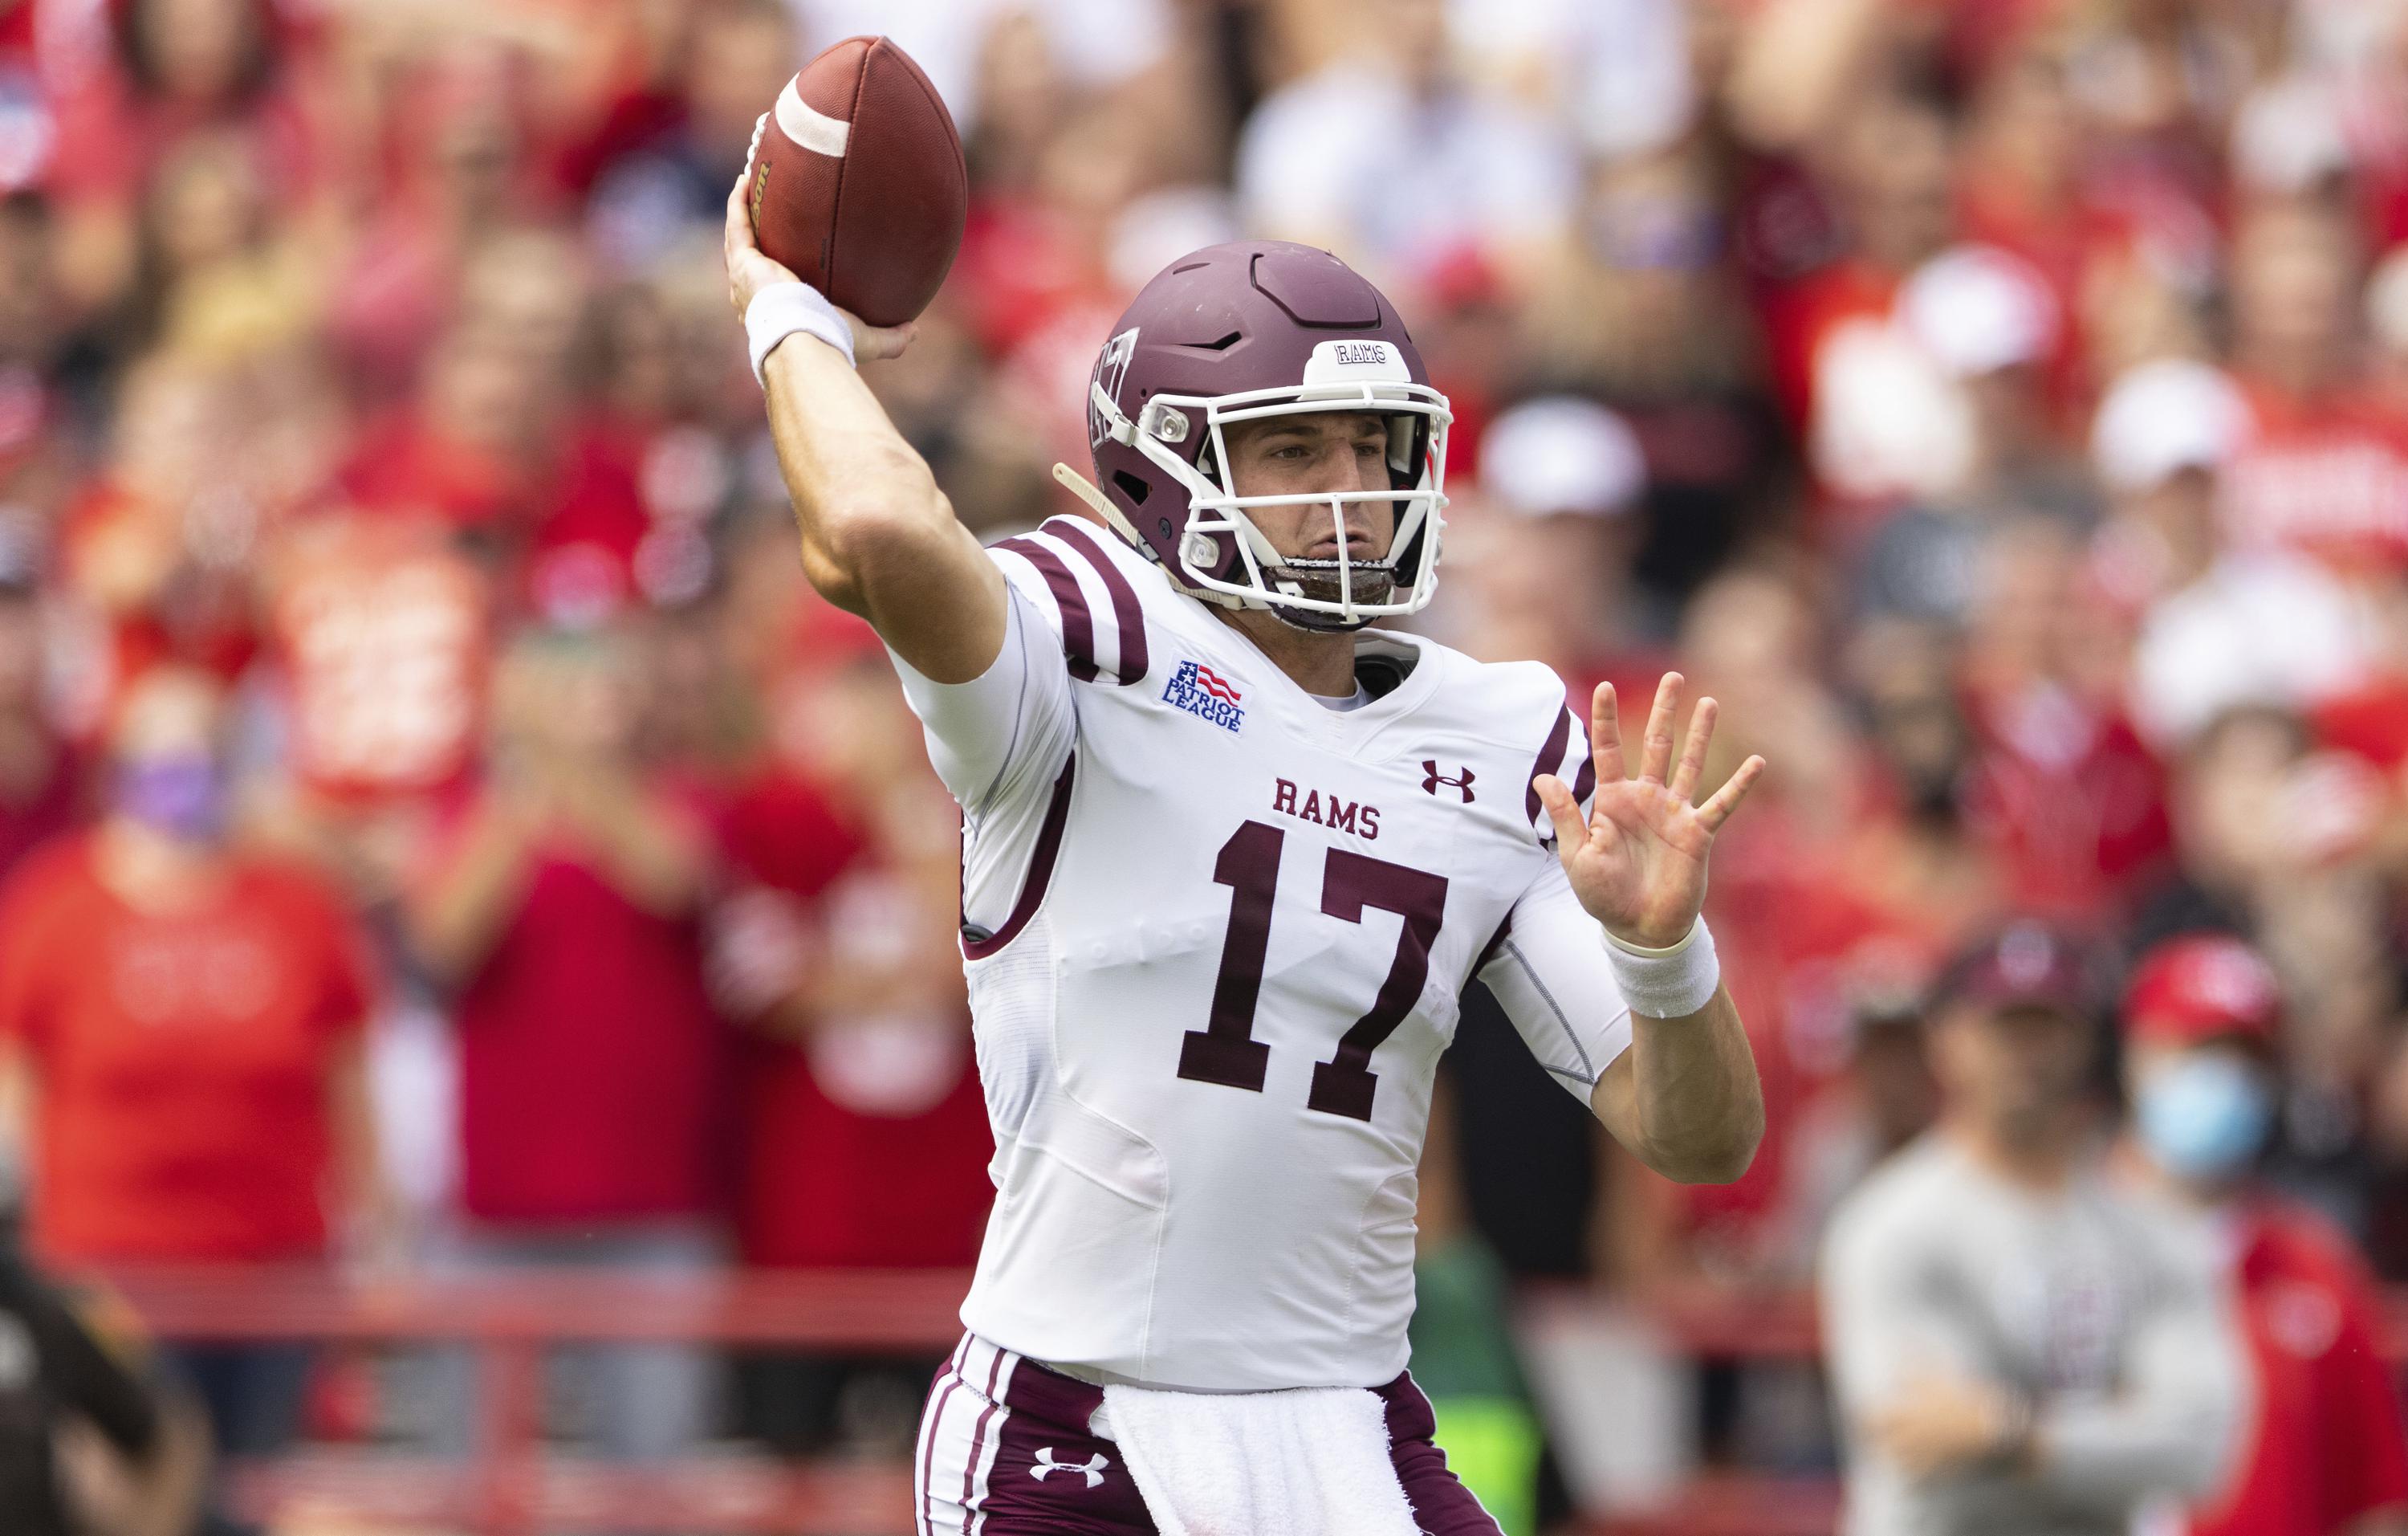 Fordham's potent offense brings taste of Rocky Top to Bronx